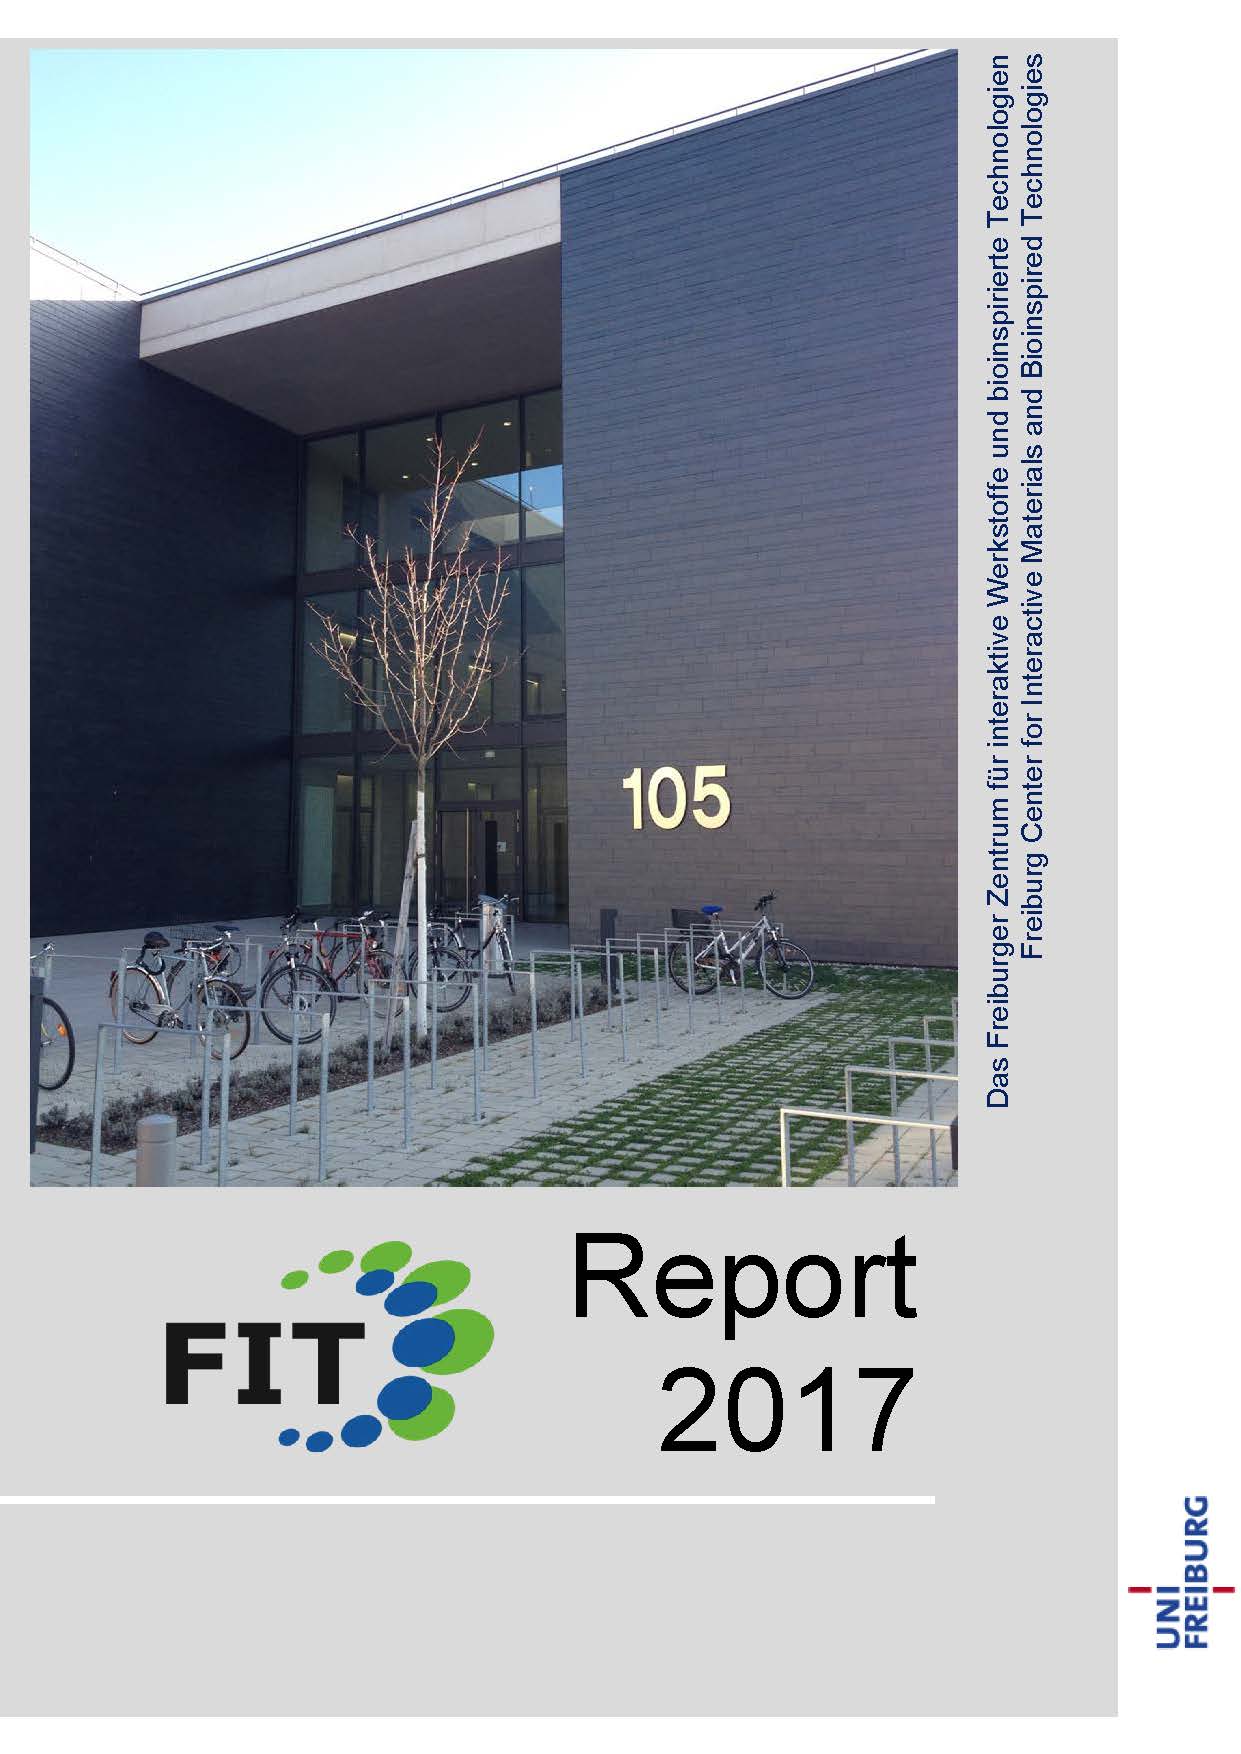 FIT-Report 2017 published